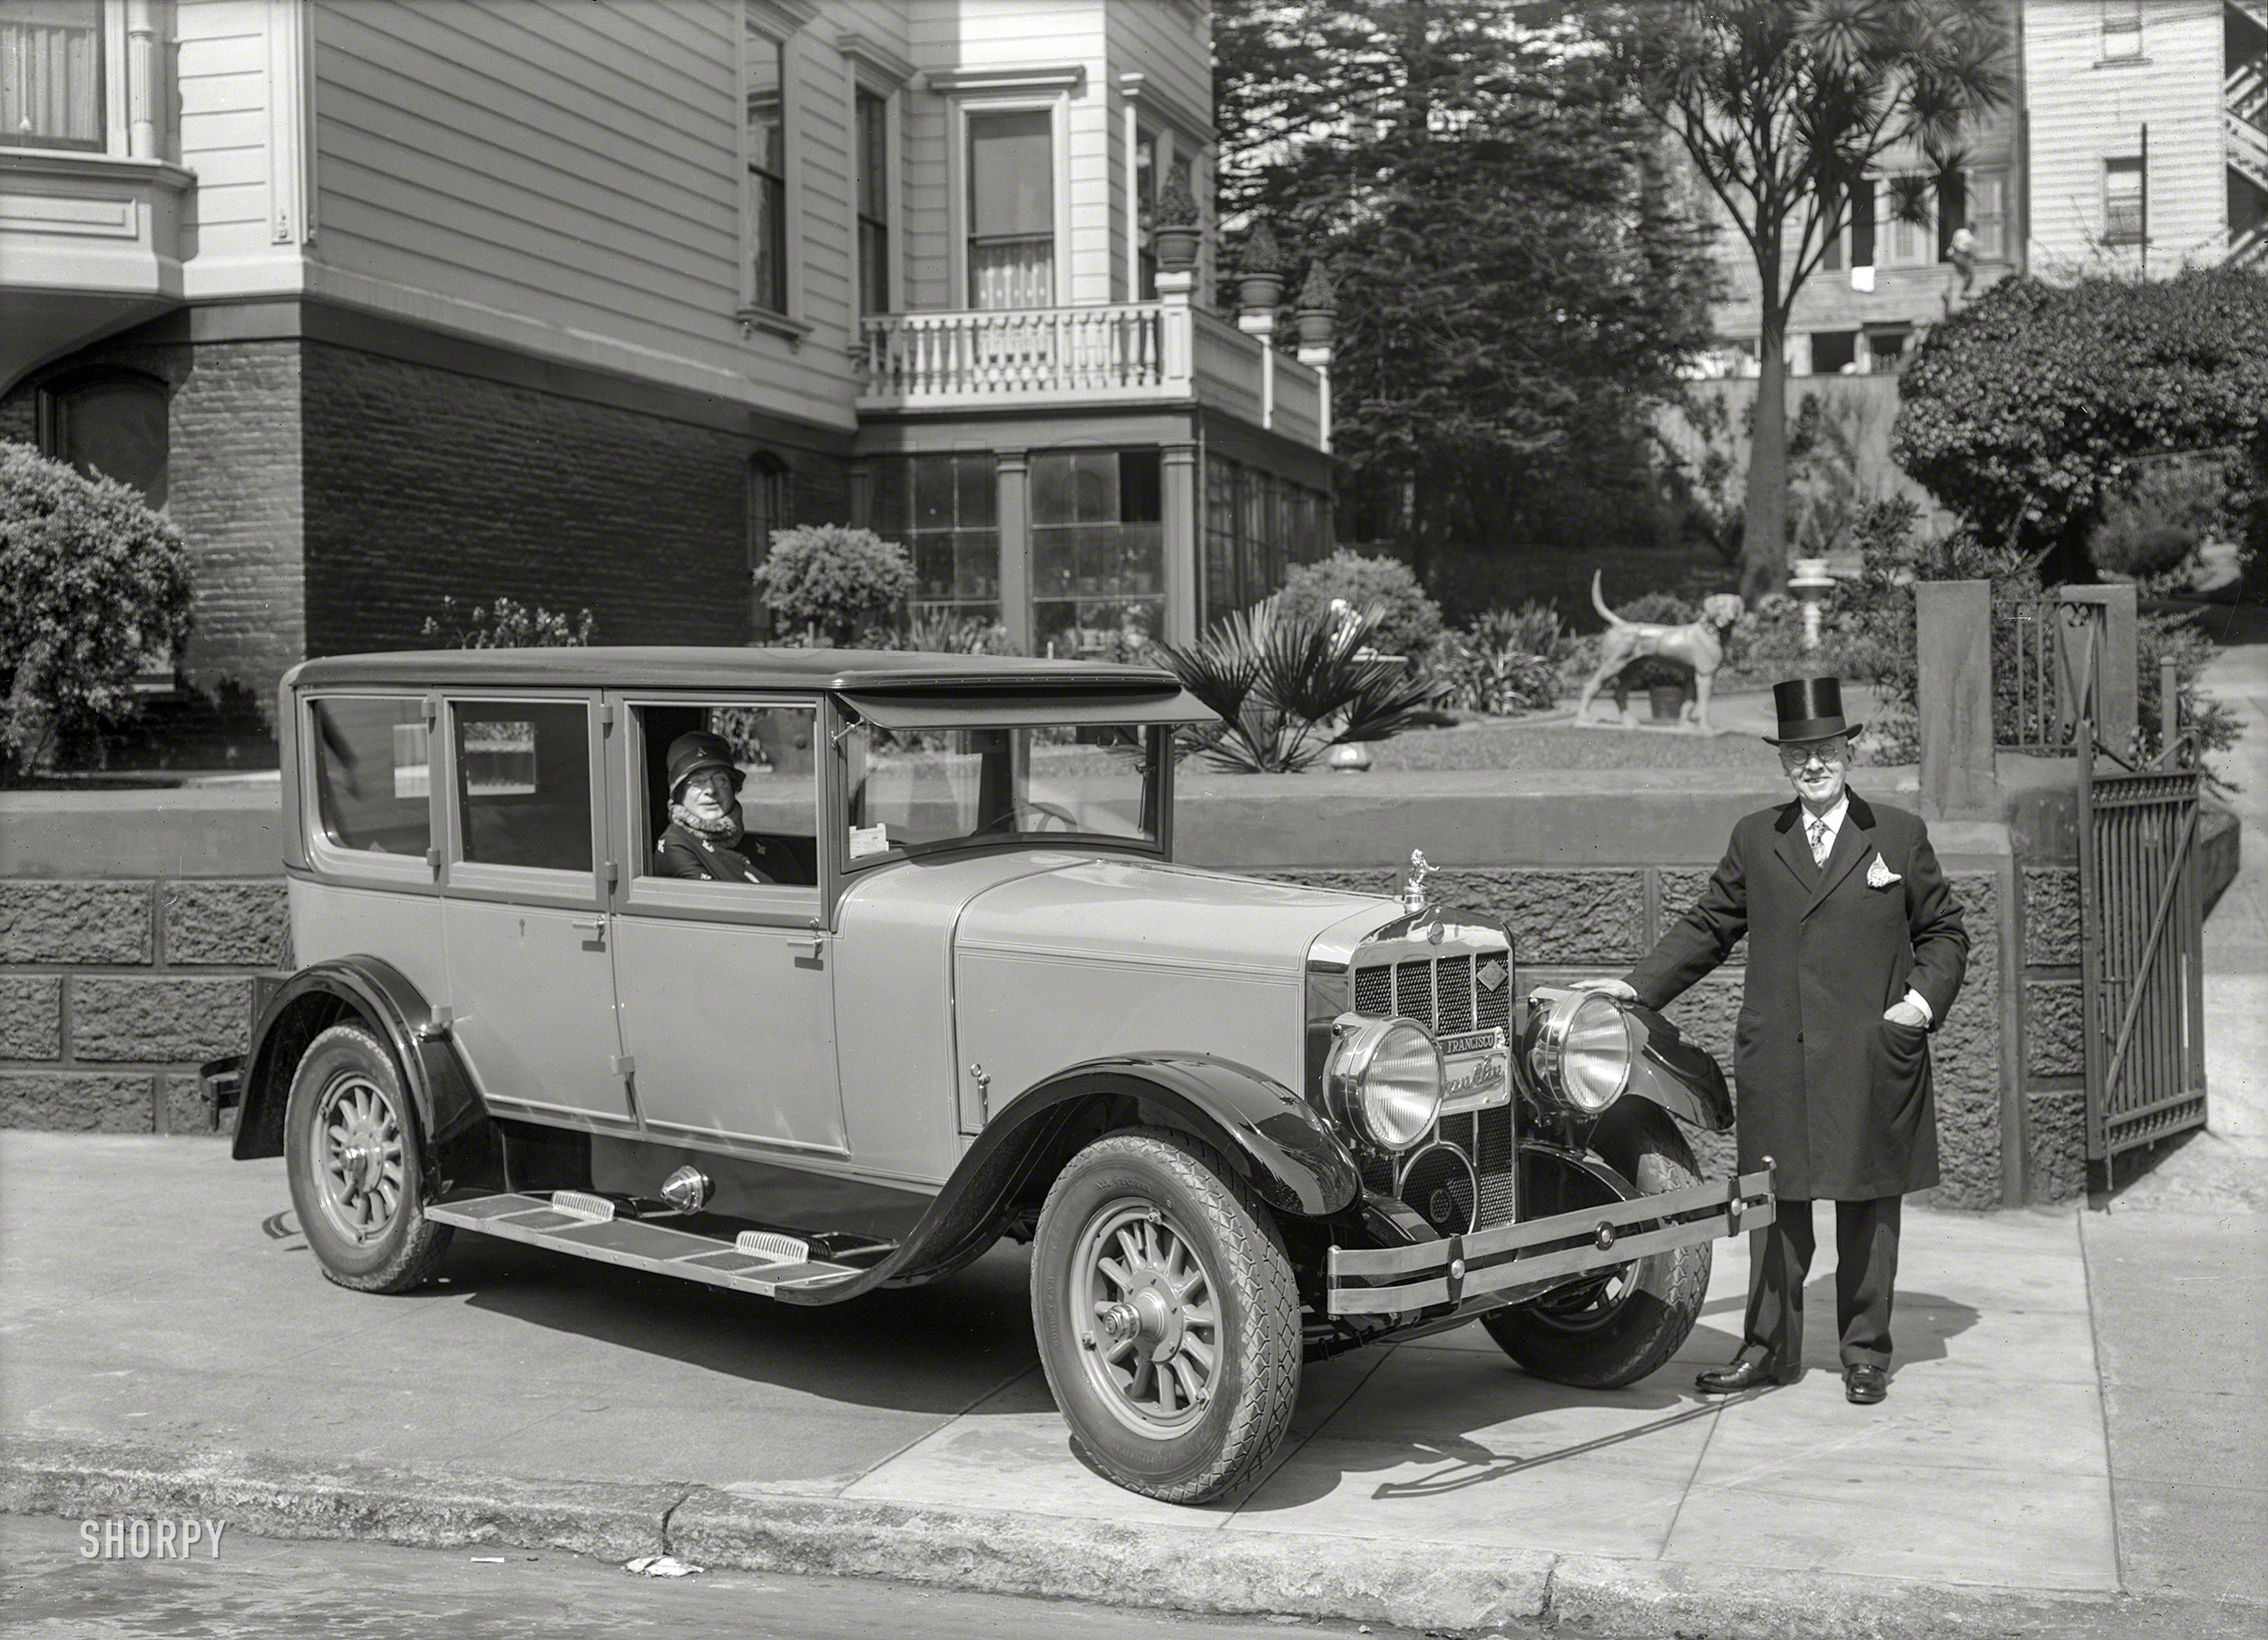 San Francisco, 1928. "Col. M. Franklin with Franklin Airman sedan." Despite such eponymous endorsements, by 1934 the air-cooled Franklin had run out of gas. 5x7 inch glass negative by Christopher Helin. View full size.